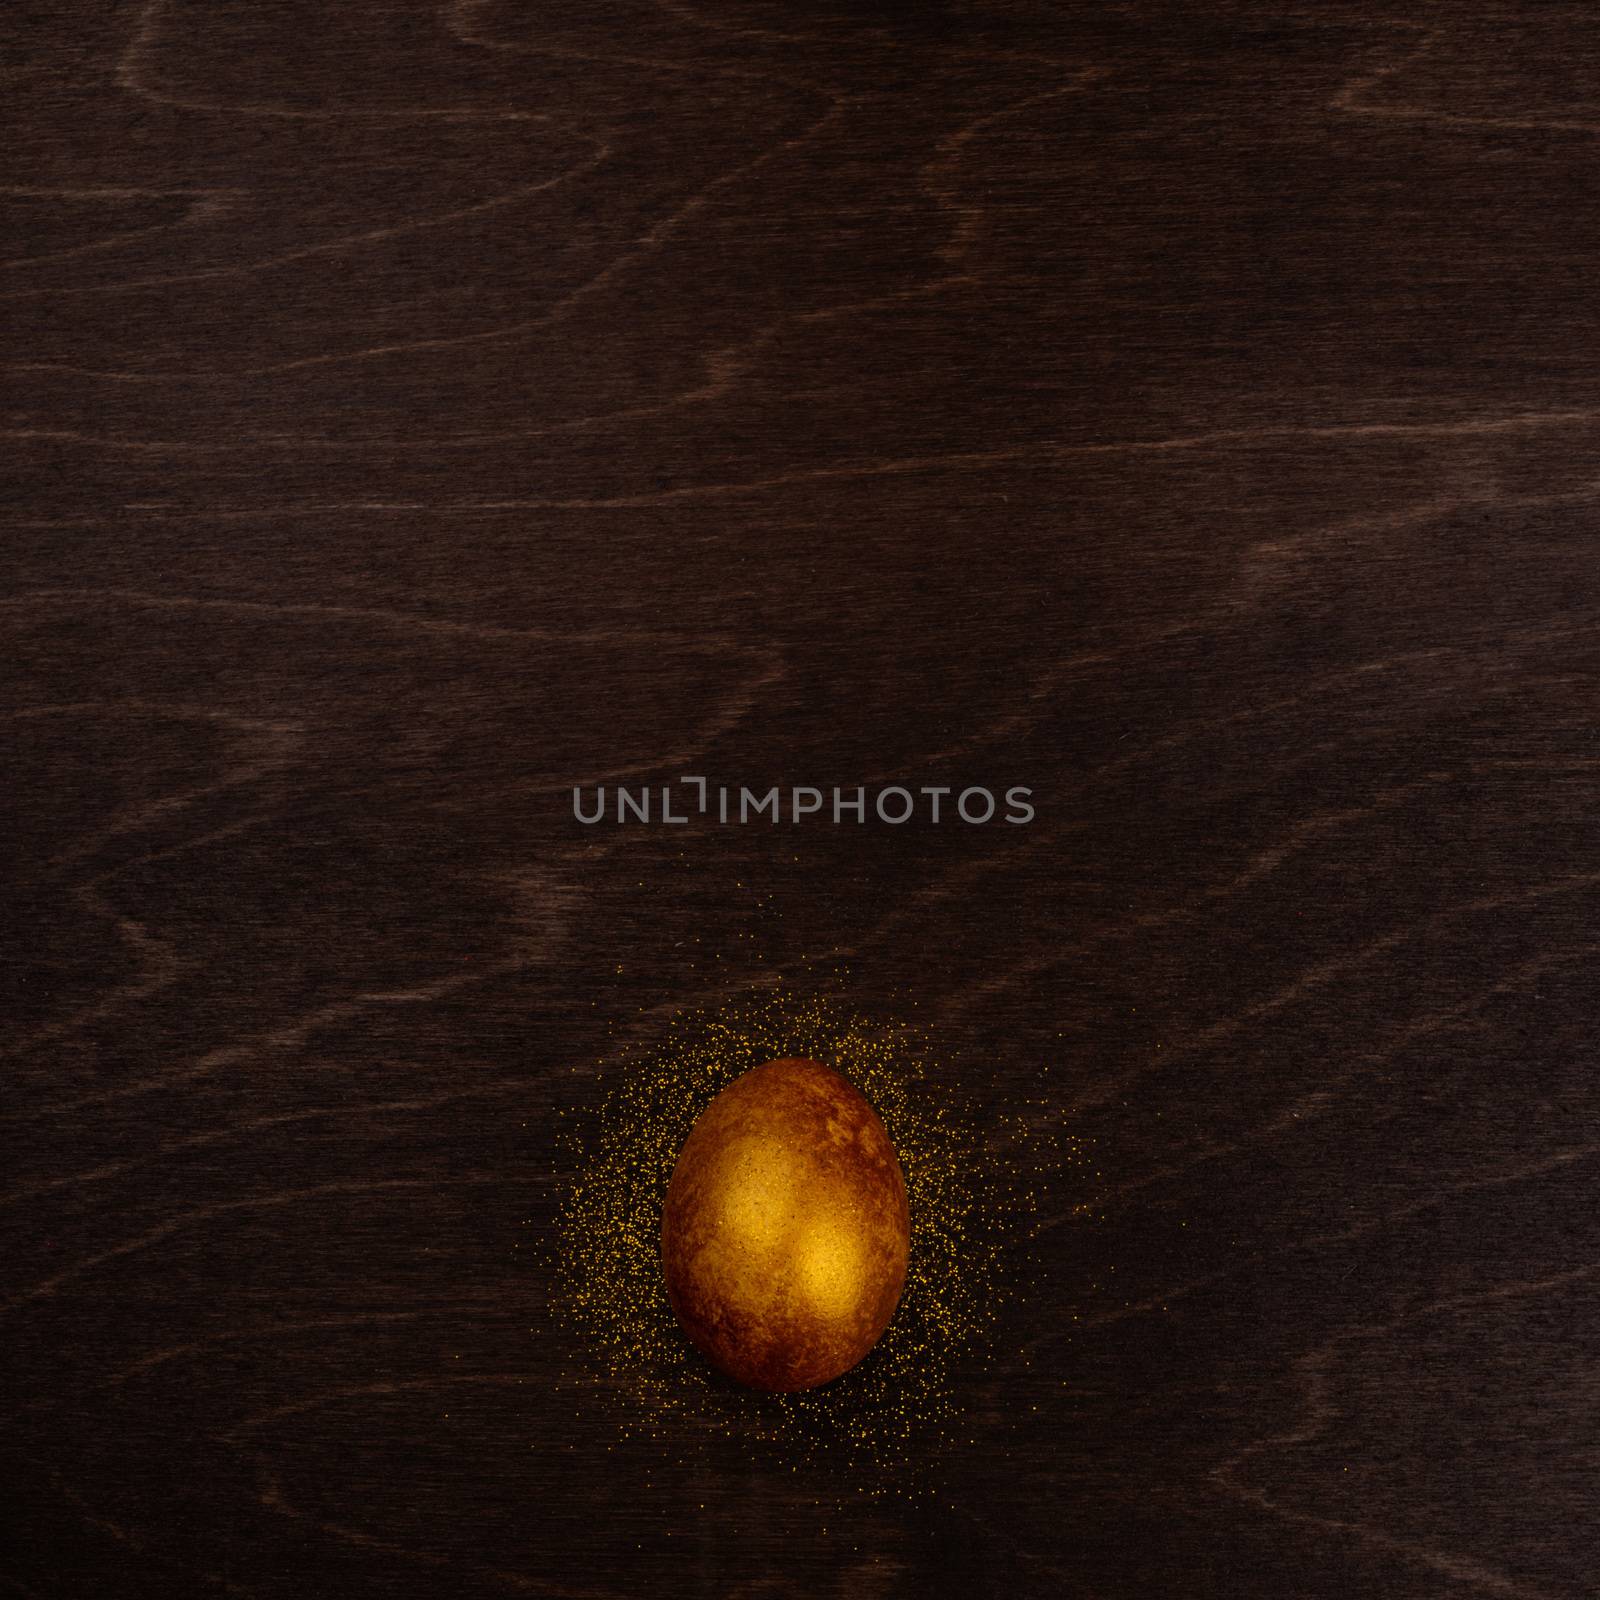 One big golden easter egg on dark wooden background copy space for text